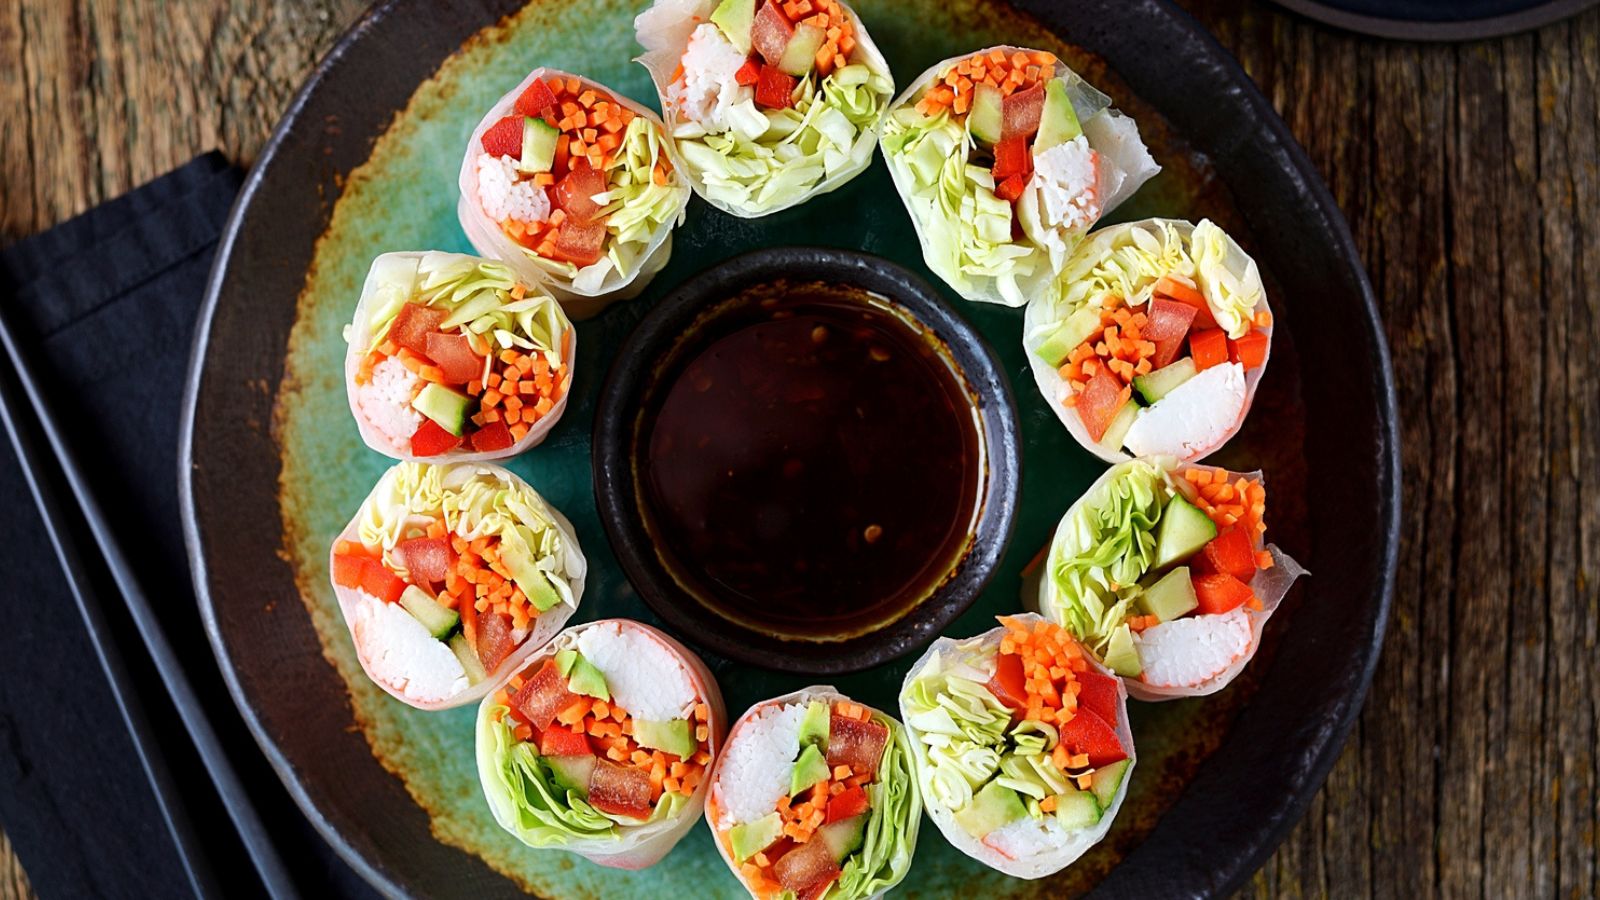 18 Rice Paper Recipes You’ll Want to Roll Up for Lunch